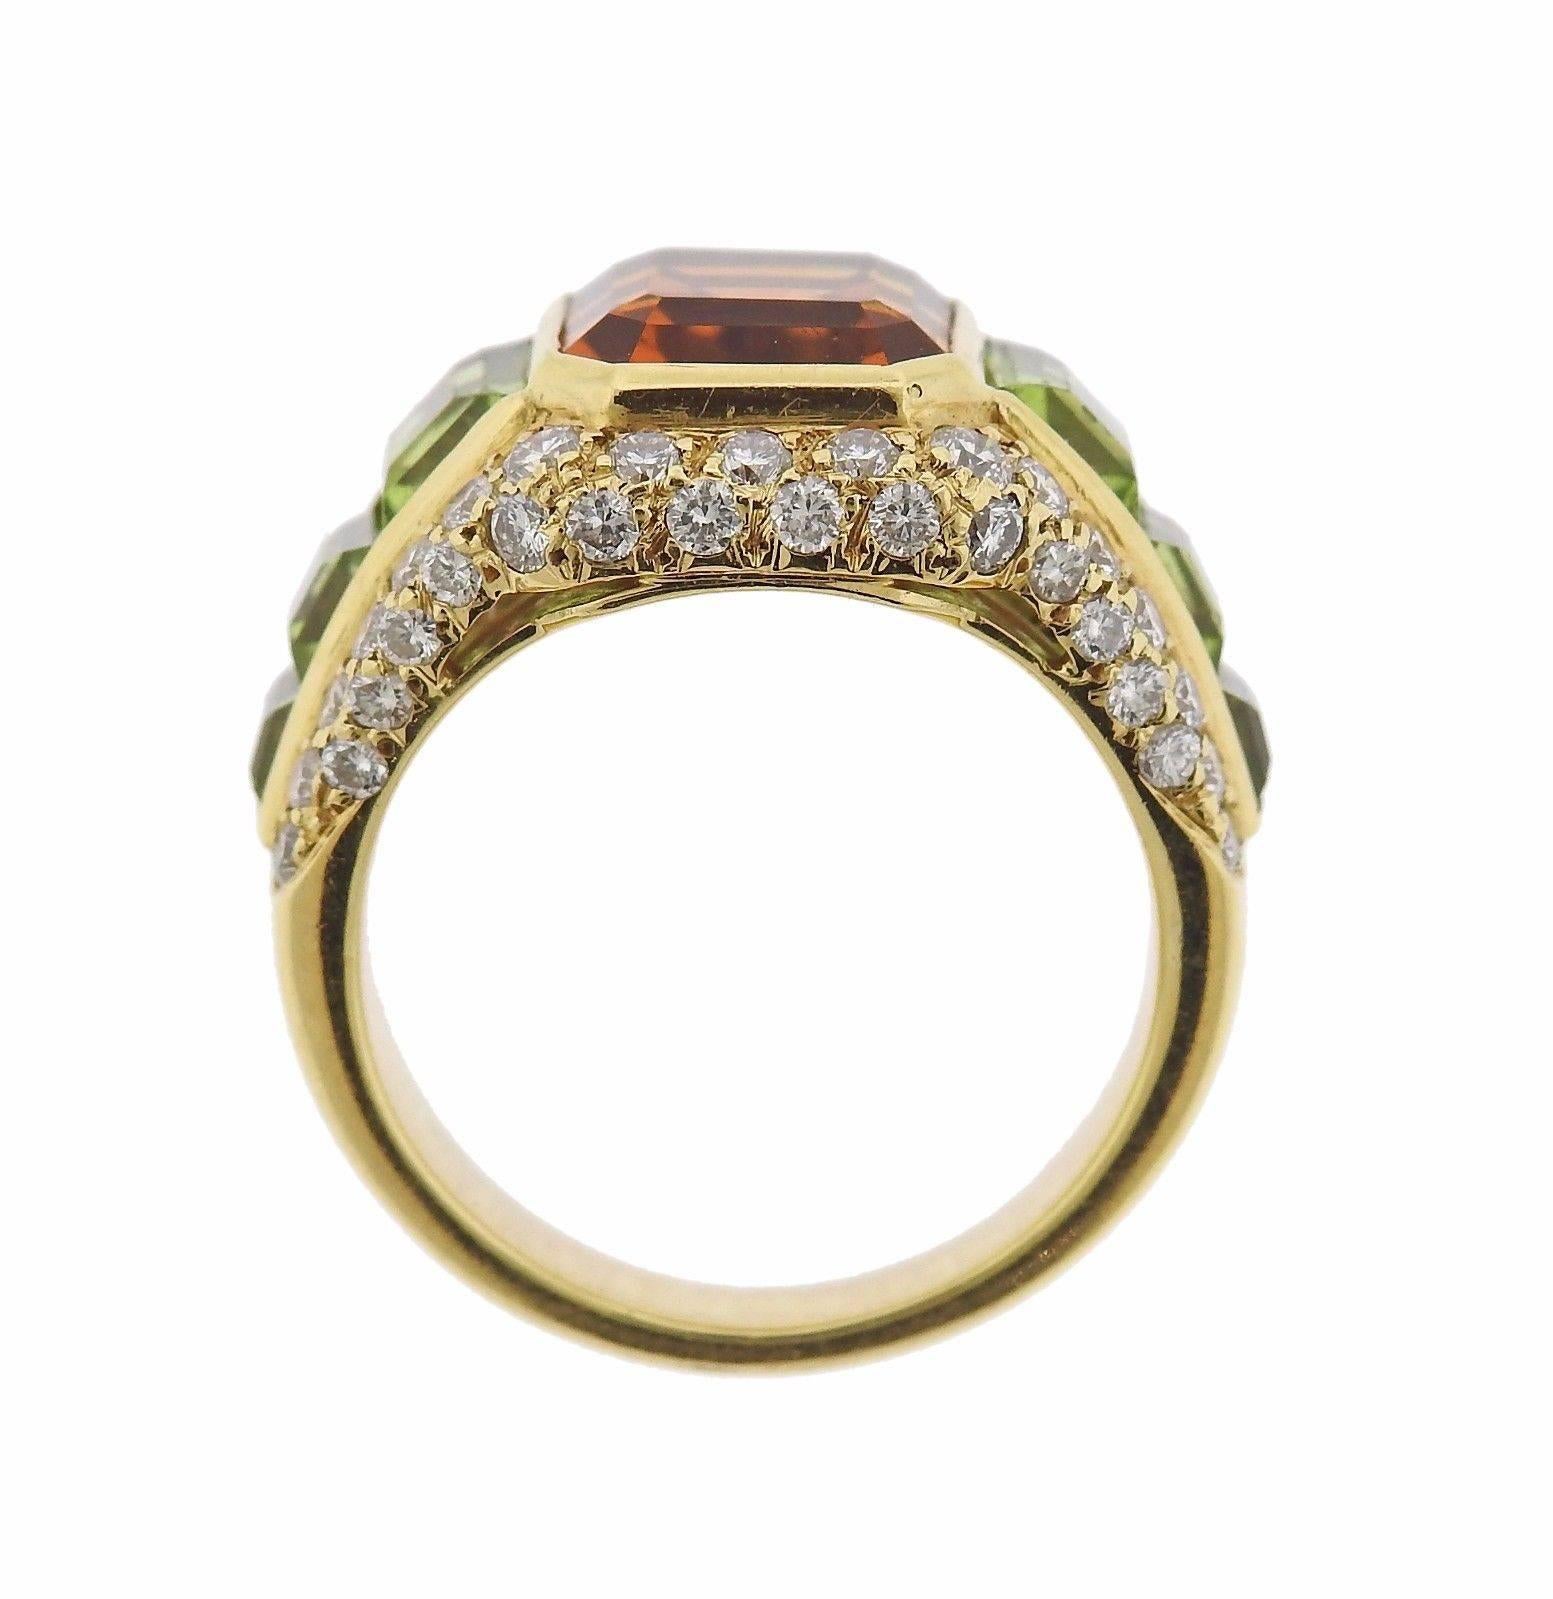 An 18k yellow gold ring set with a 3.3ct citrine which is accented by peridot and approximately 0.70ctw of G/VS diamonds.  The ring is a size 6 1/4 and it is 15mm wide.  The weight of the piece is 11.2 grams.  Marked: 750, Bvlgari, BA9214.